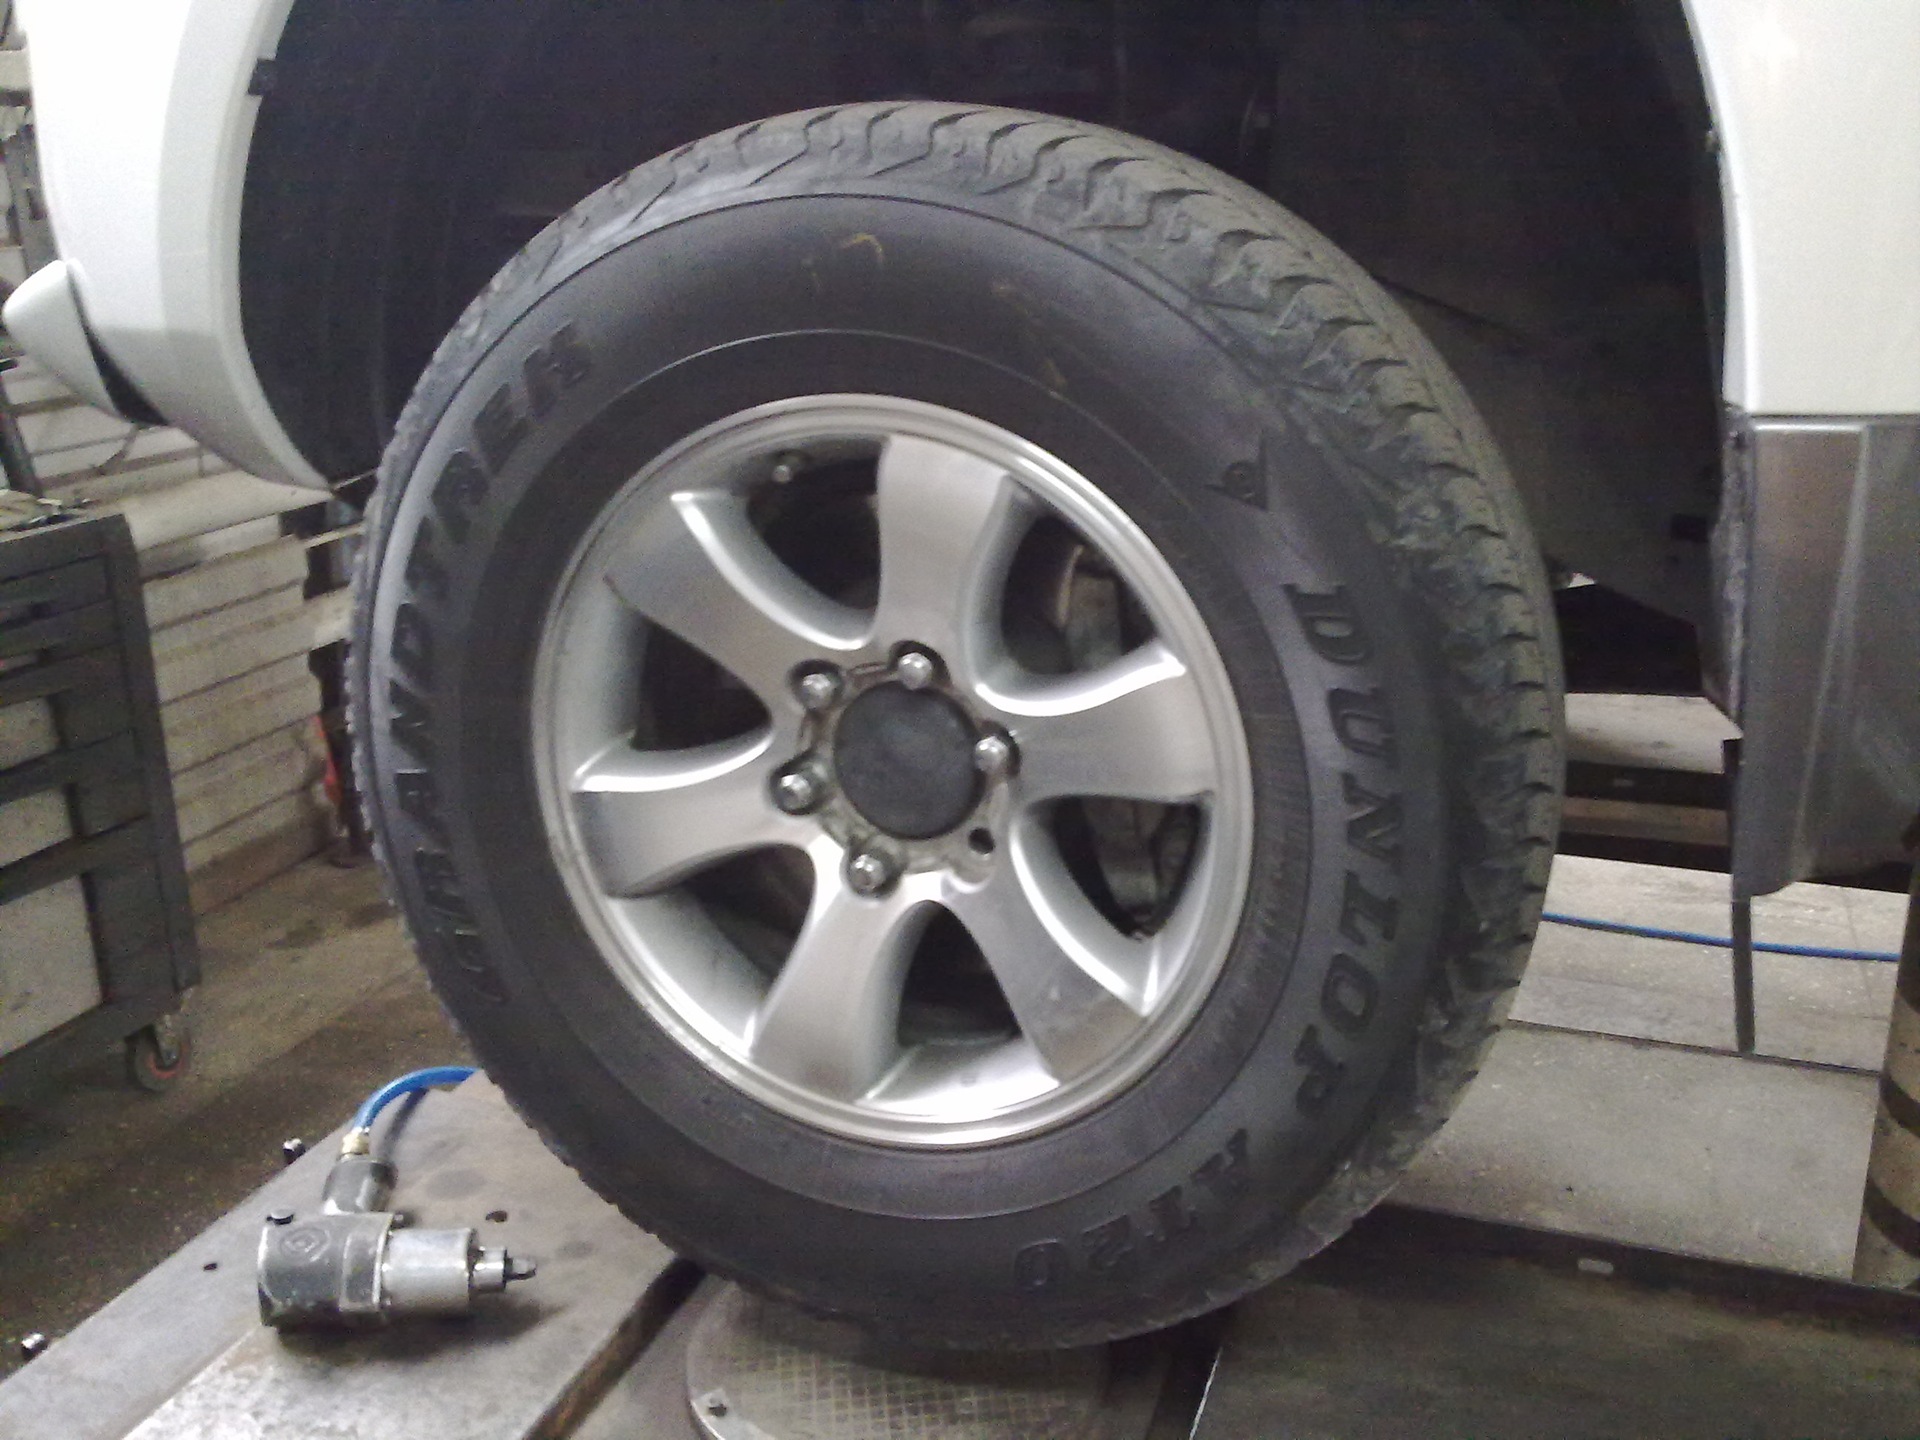 Punctured the wheel and changed the hairpin - Toyota Land Cruiser Prado 27 L 2007